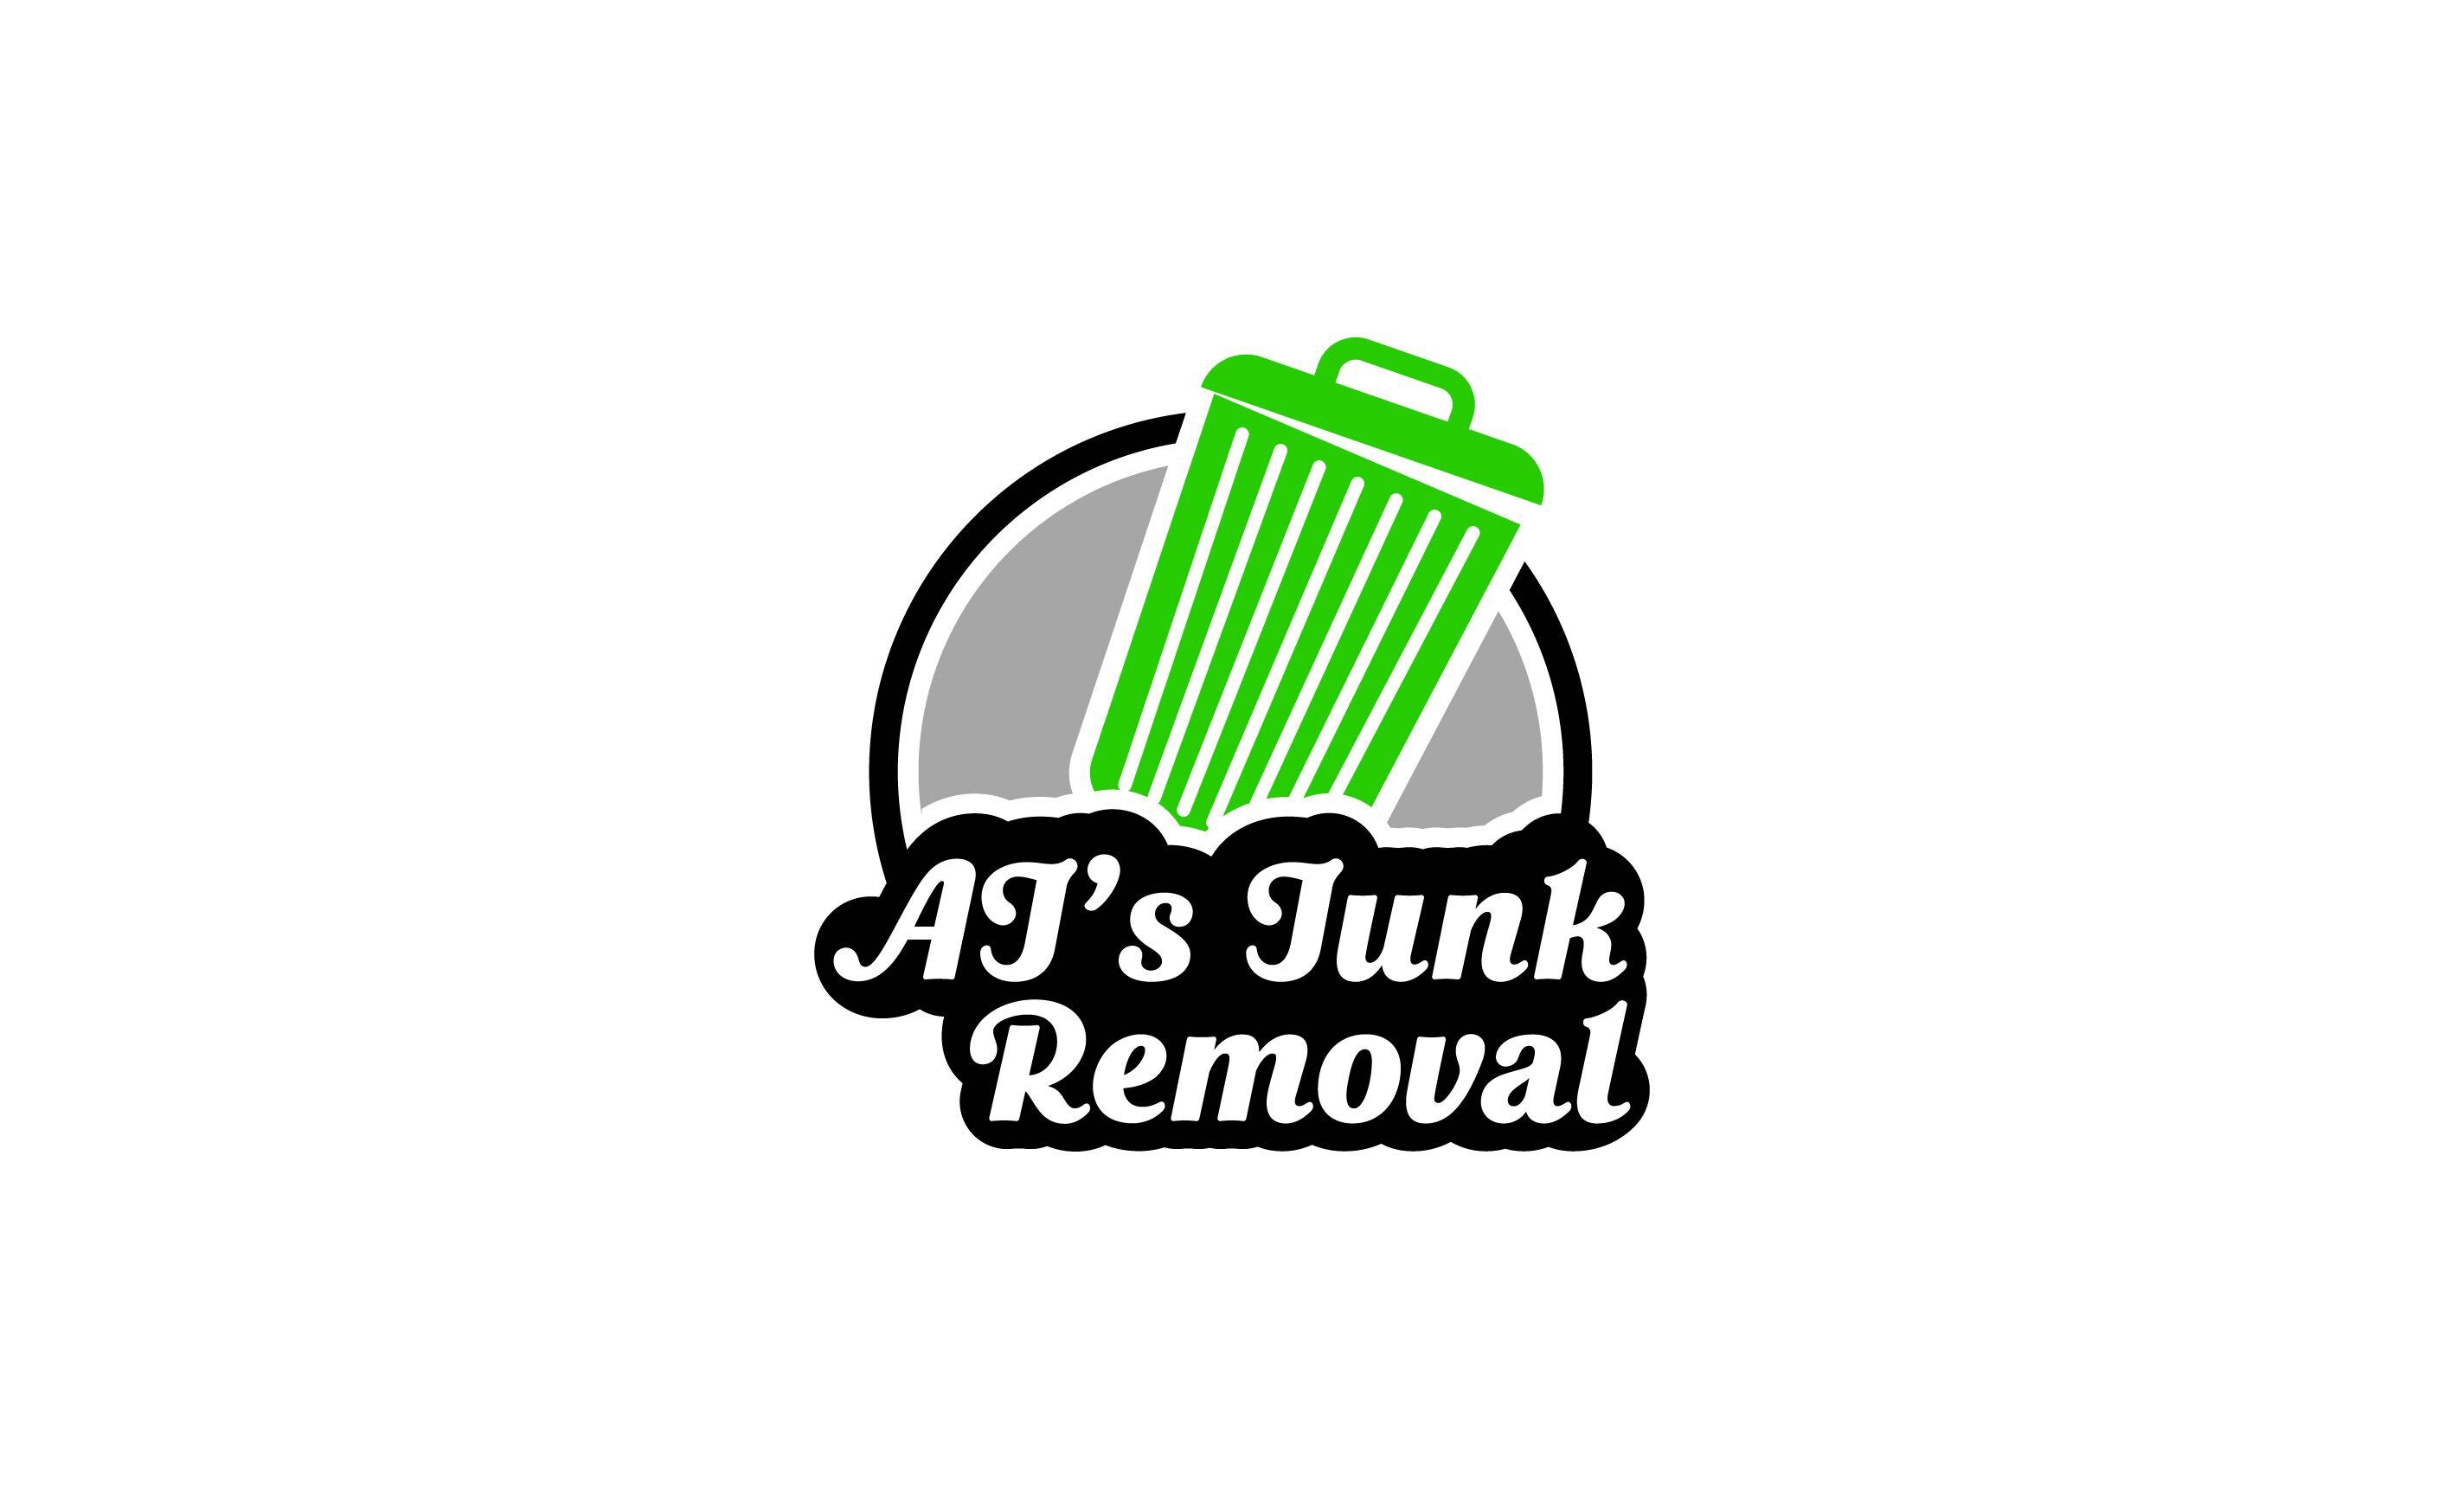 AJ's Junk Removal logo depicting a clean and professional junk removal service in Fairfield County.